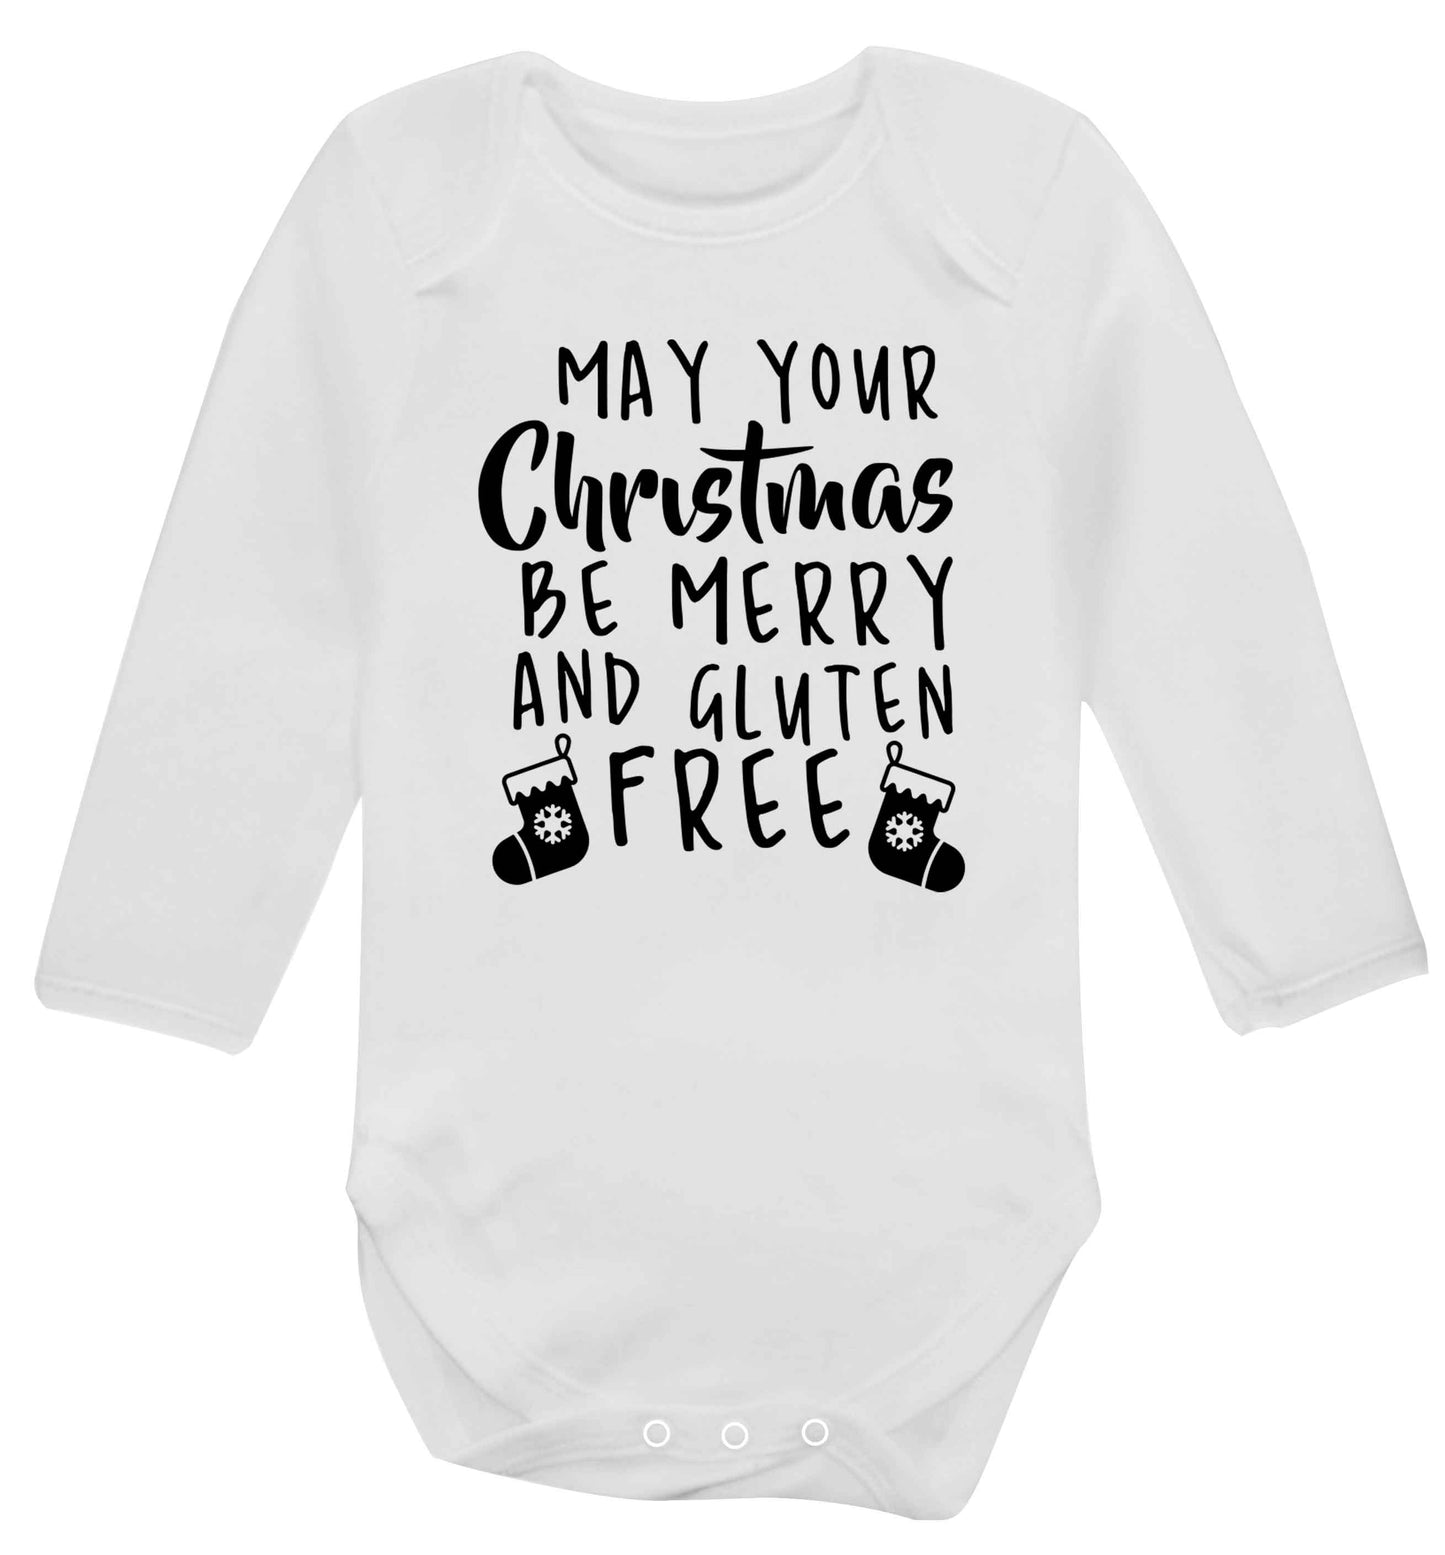 May your Christmas be merry and gluten free Baby Vest long sleeved white 6-12 months